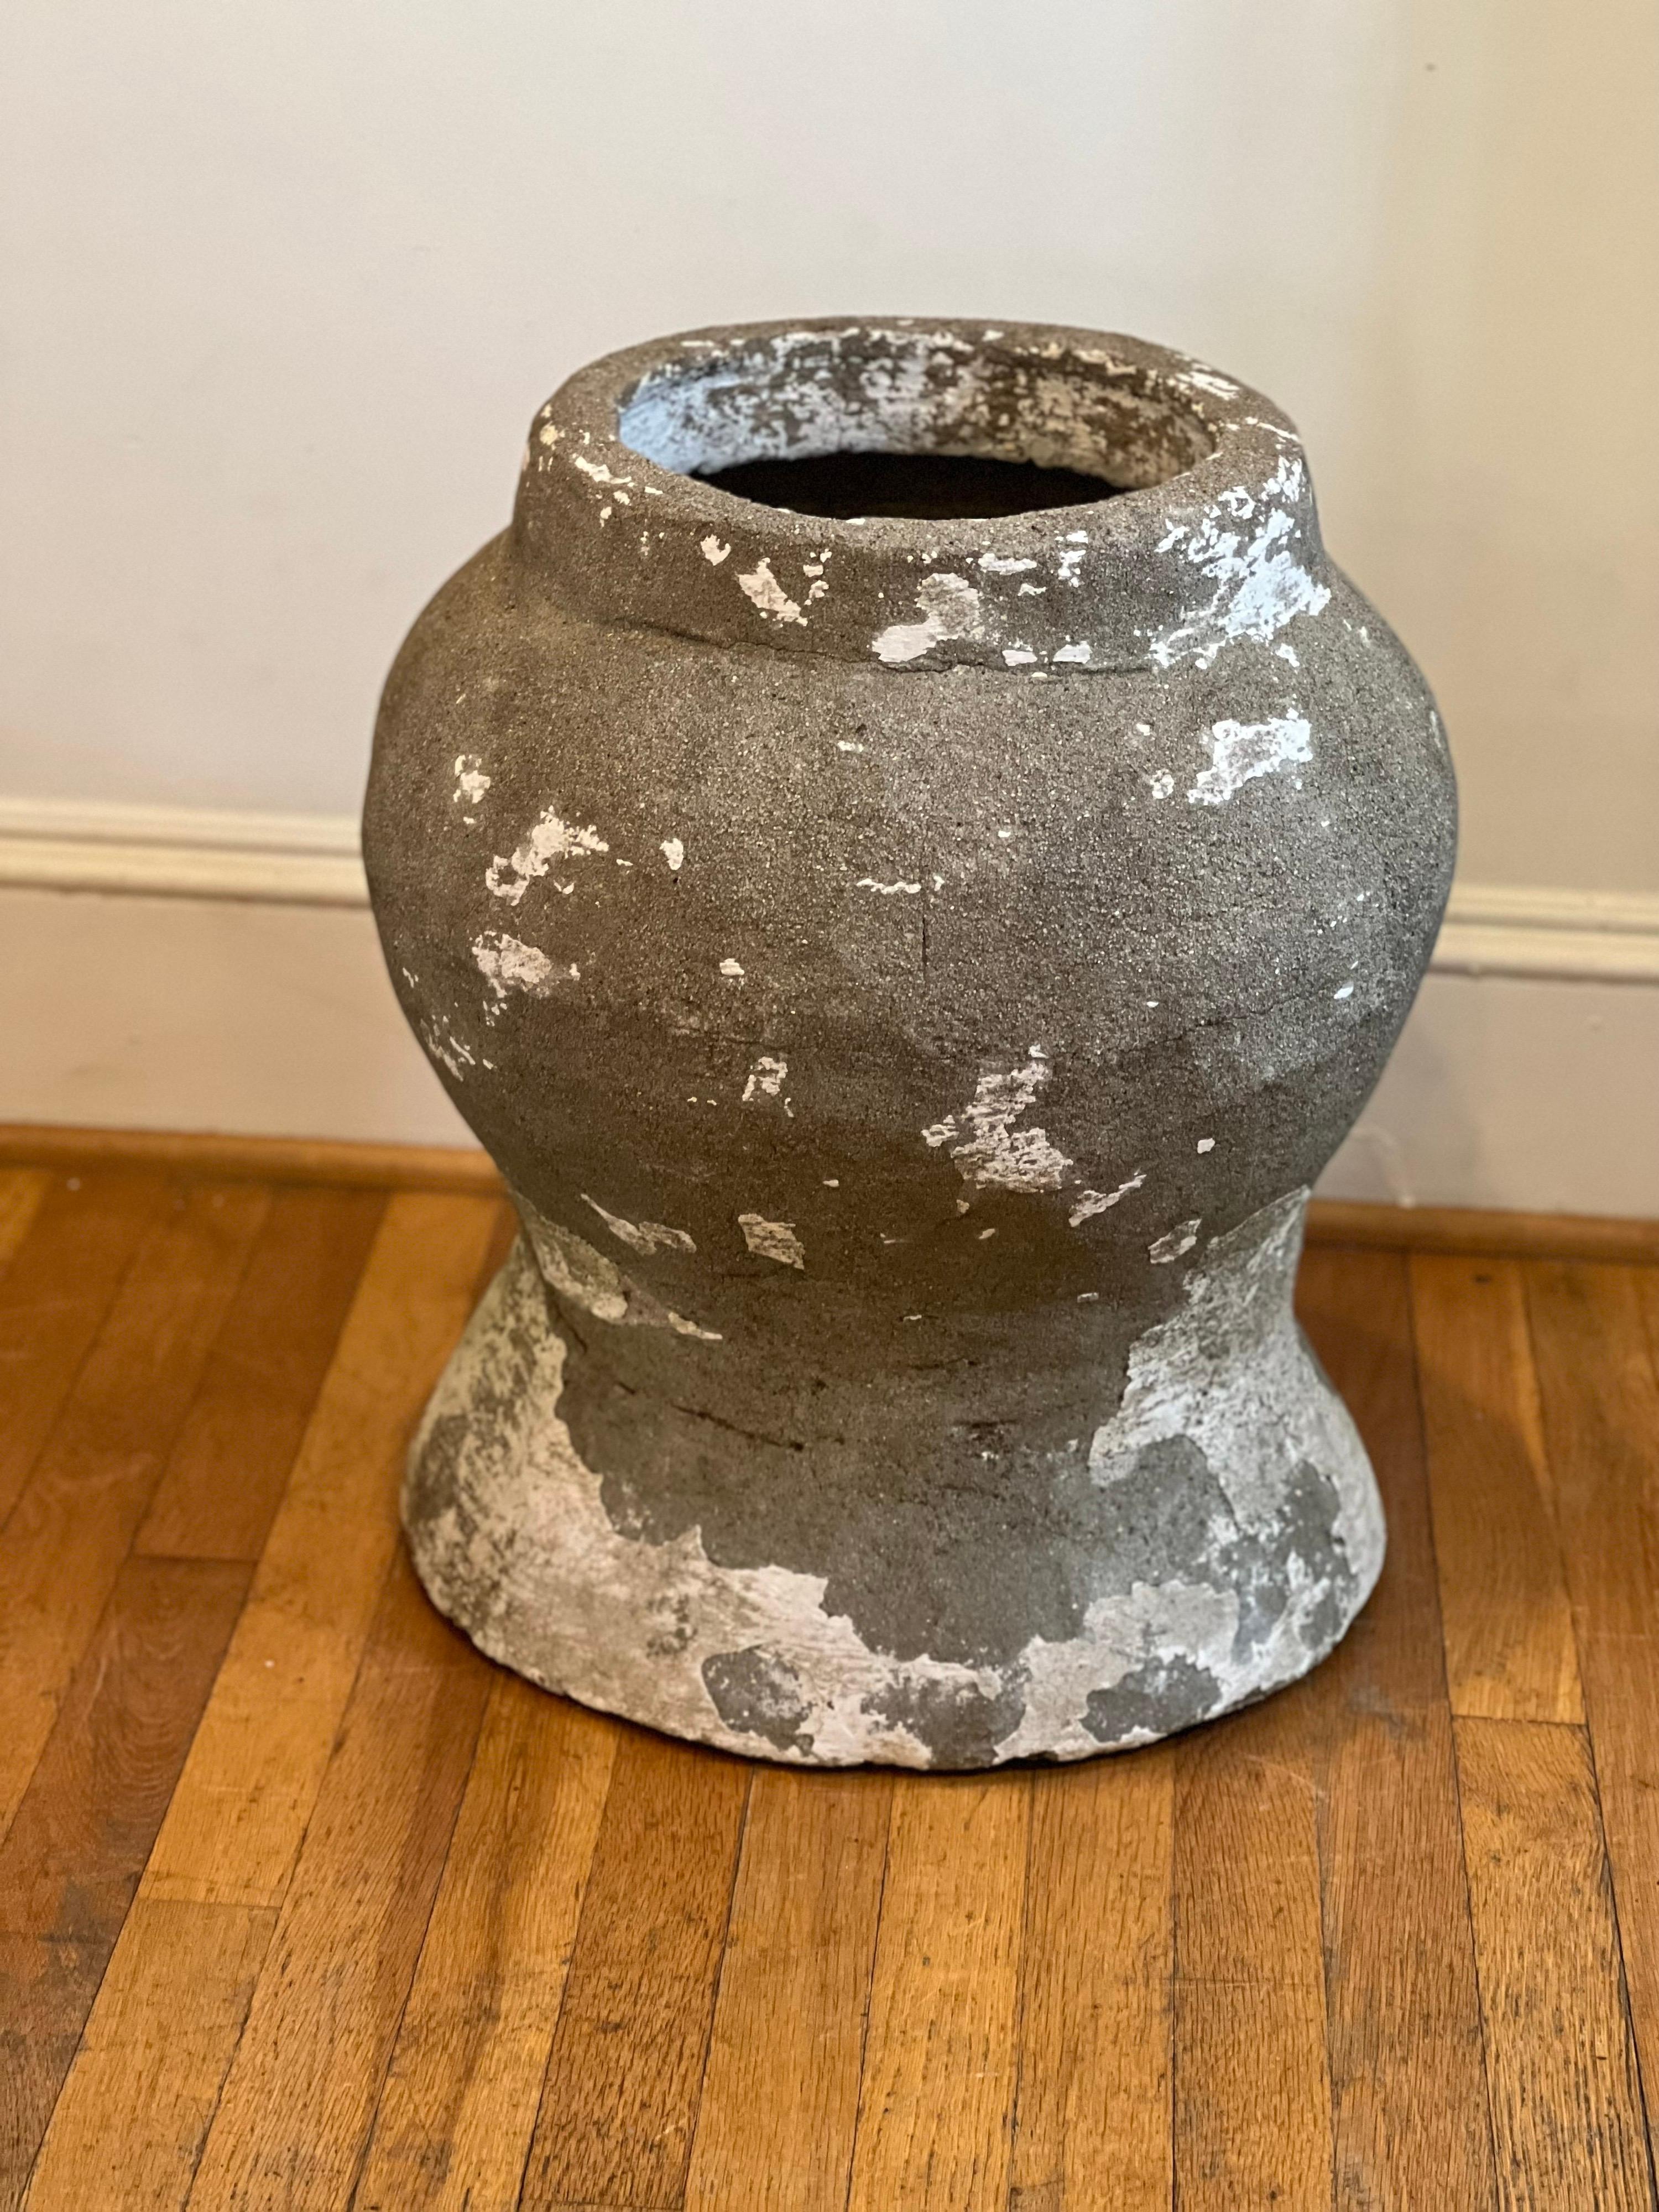 Organic Modern vintage stone planter. Could work indoor with tree or outdoor.
Large round interior. 

Has a weathered, but very solid look. See pics for condition. Has large hole in bottom for drainage.